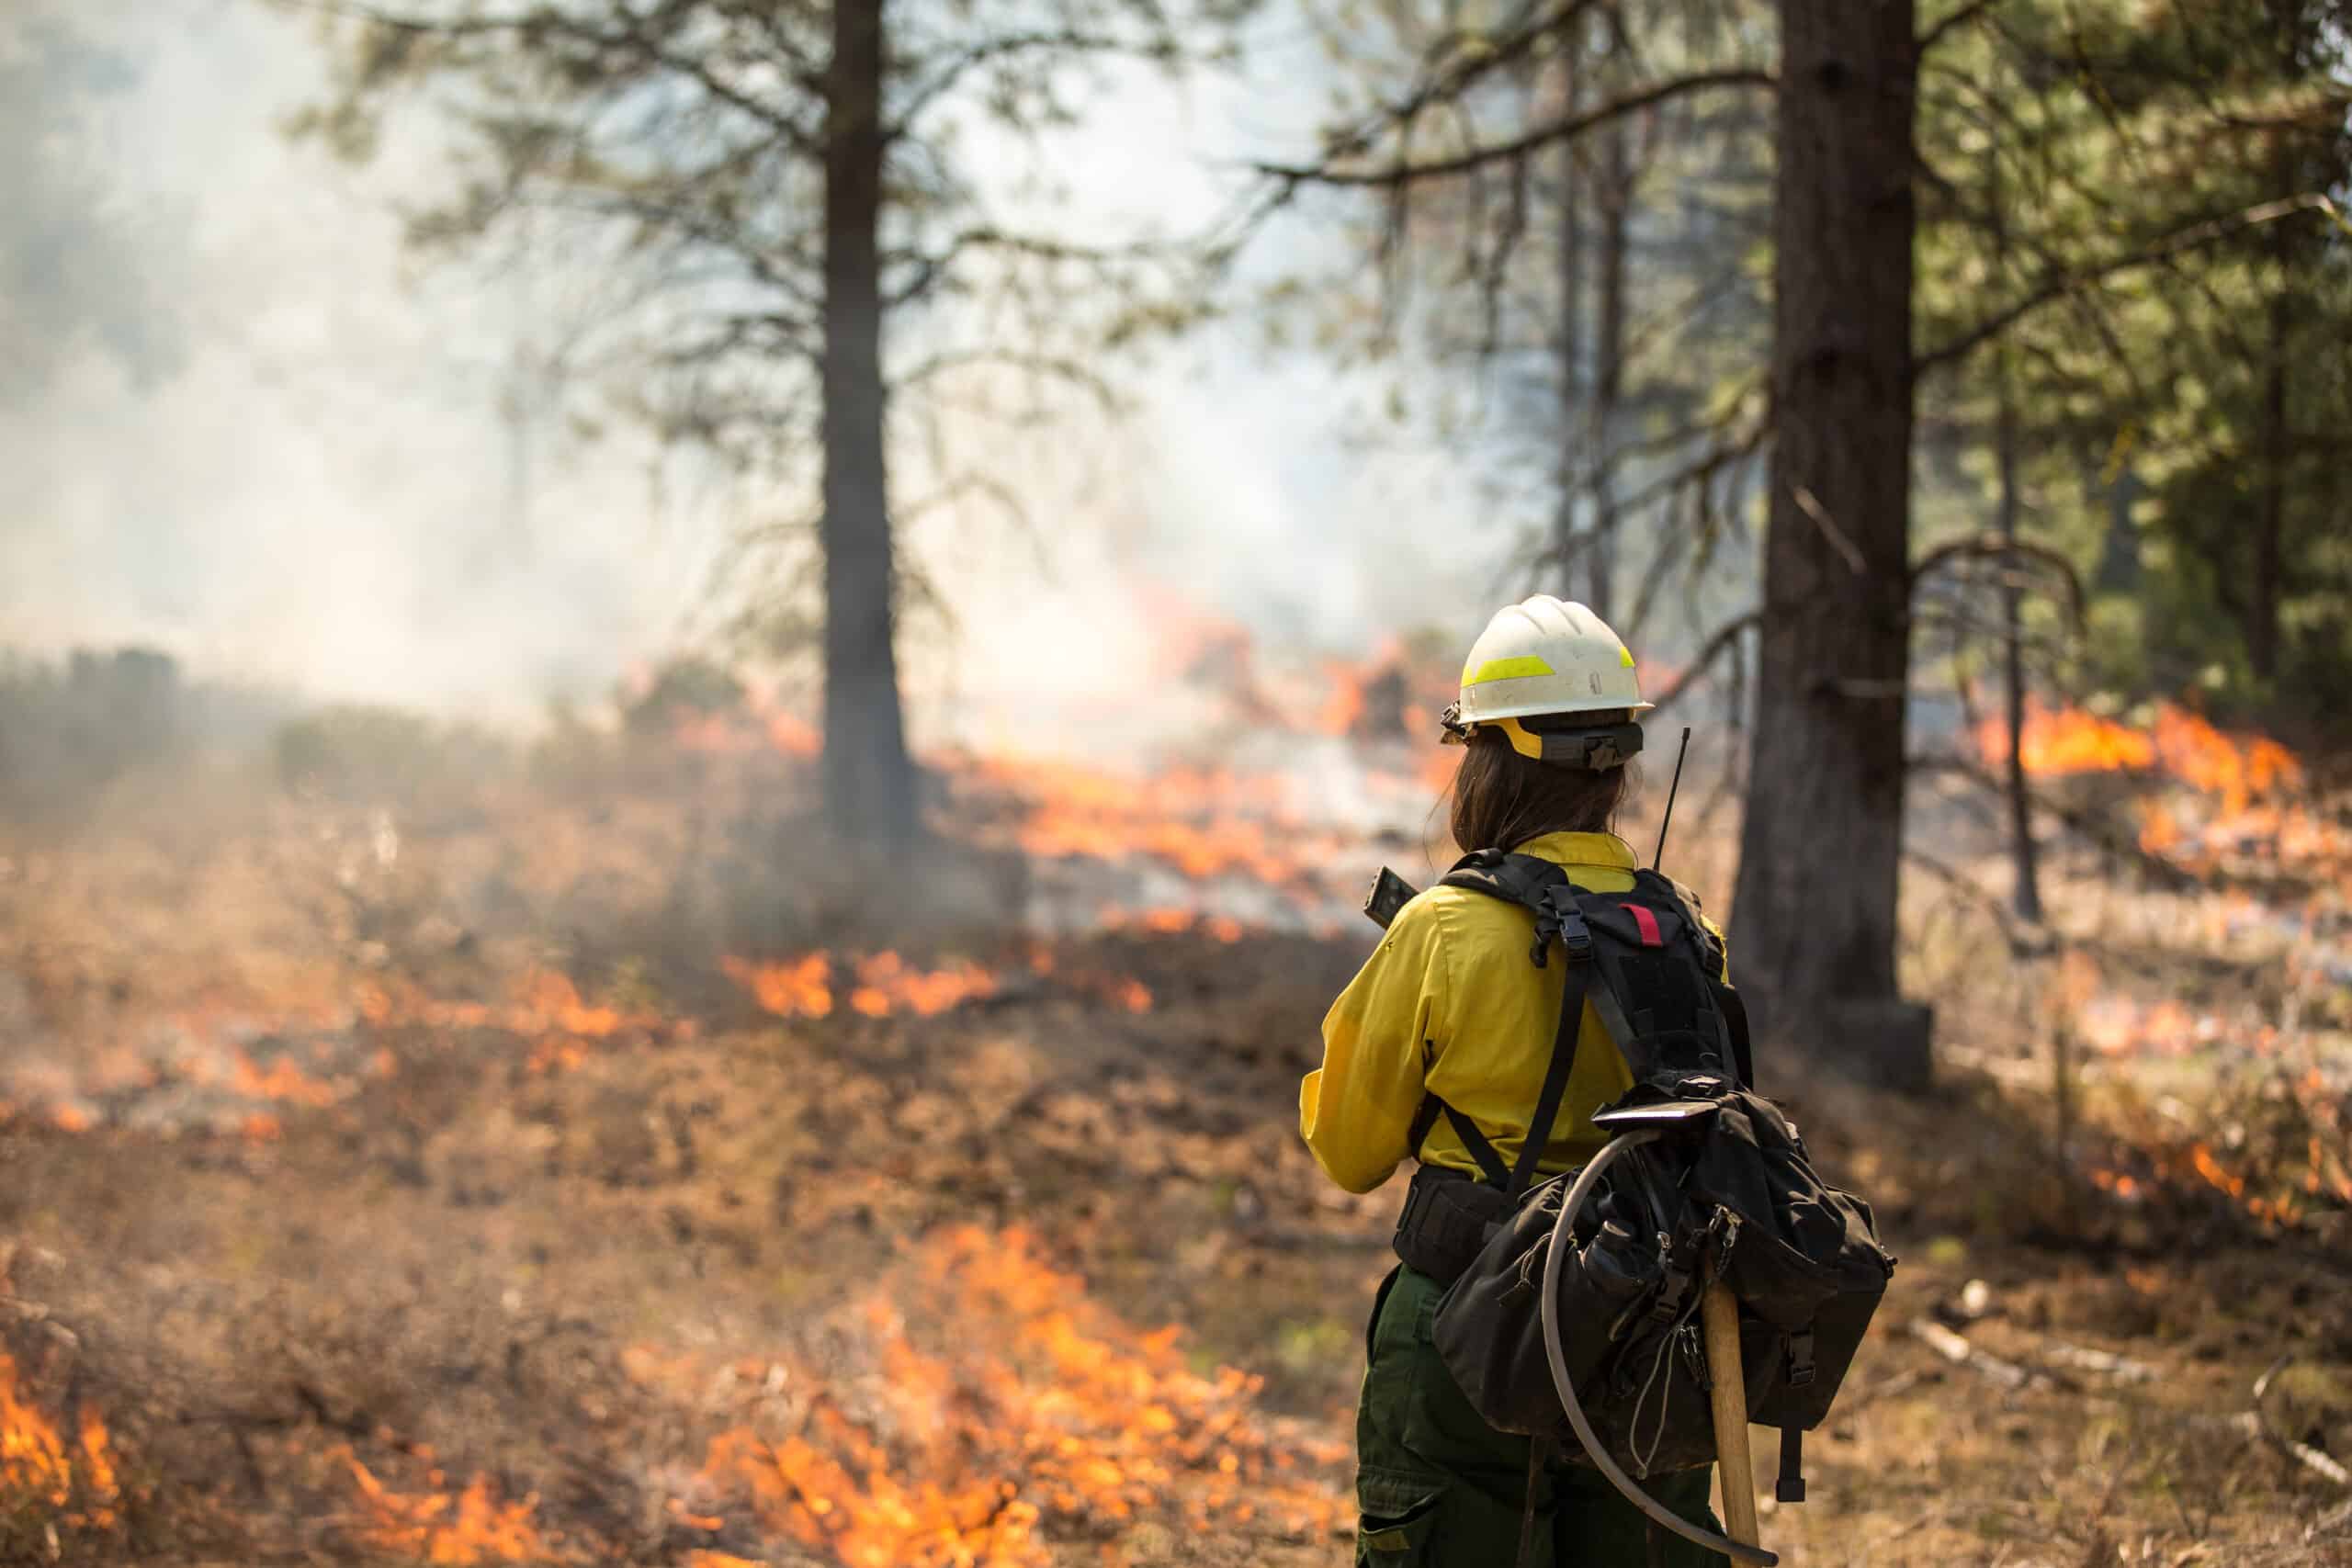 IoT is helping communities mitigate the effects of wildfires and other natural disasters